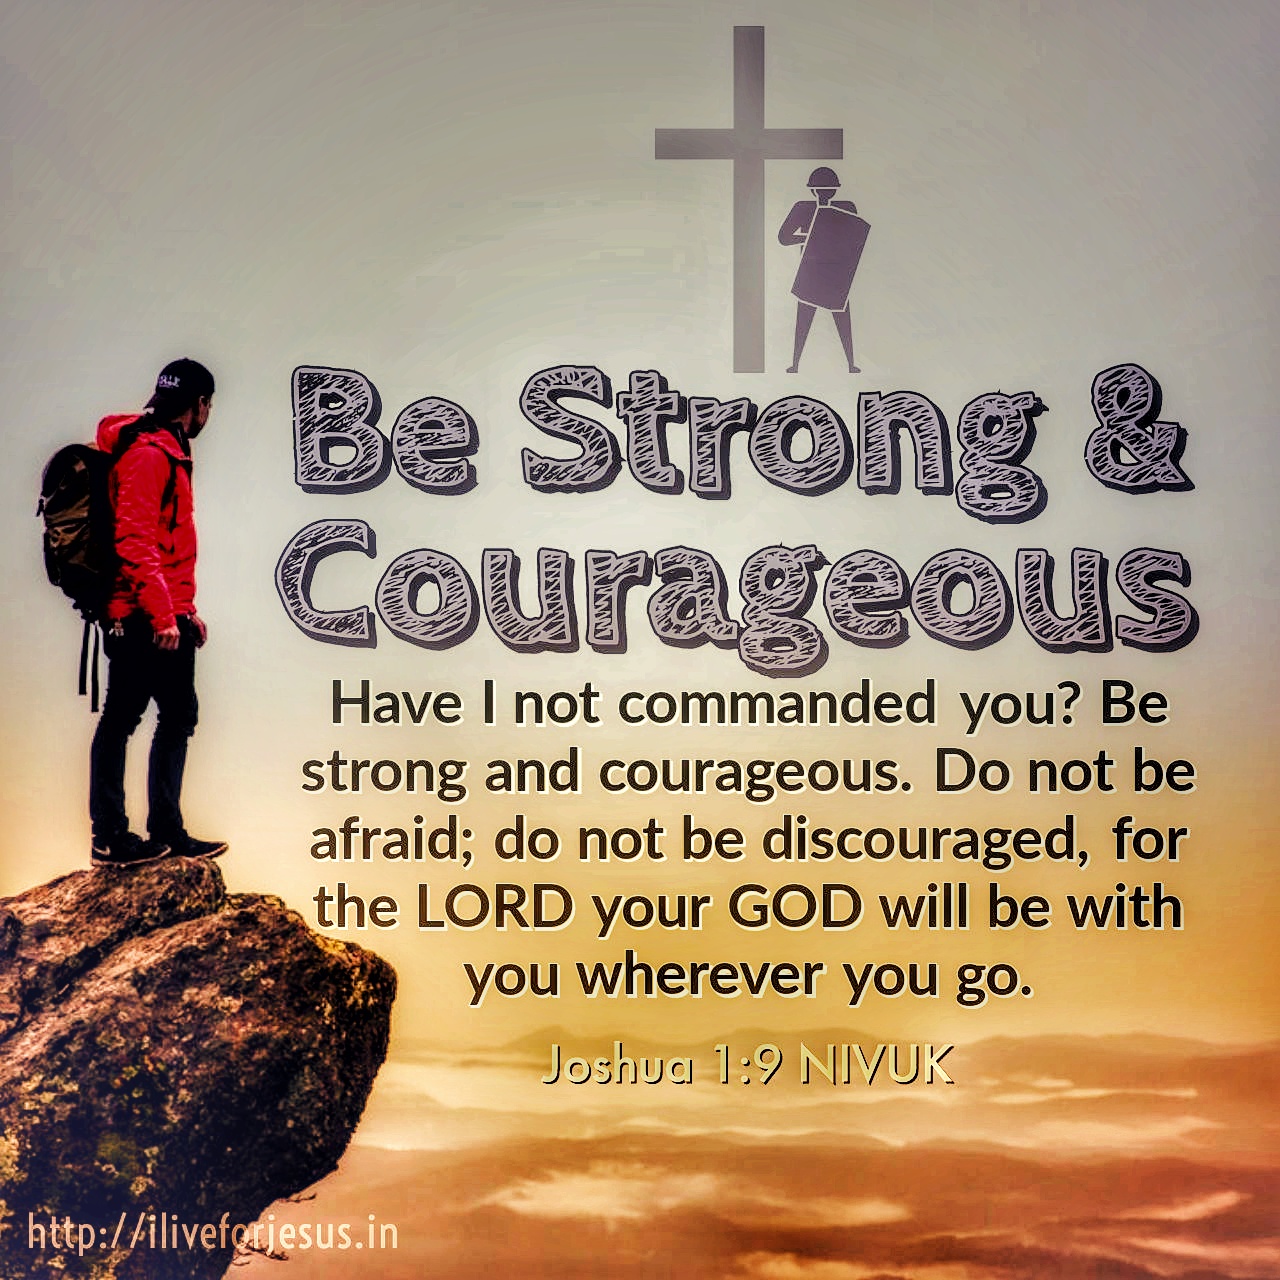 Have I not commanded you? Be strong and courageous. Do not be afraid; do not be discouraged, for the Lord your God will be with you wherever you go. Joshua 1:9 NIVUK